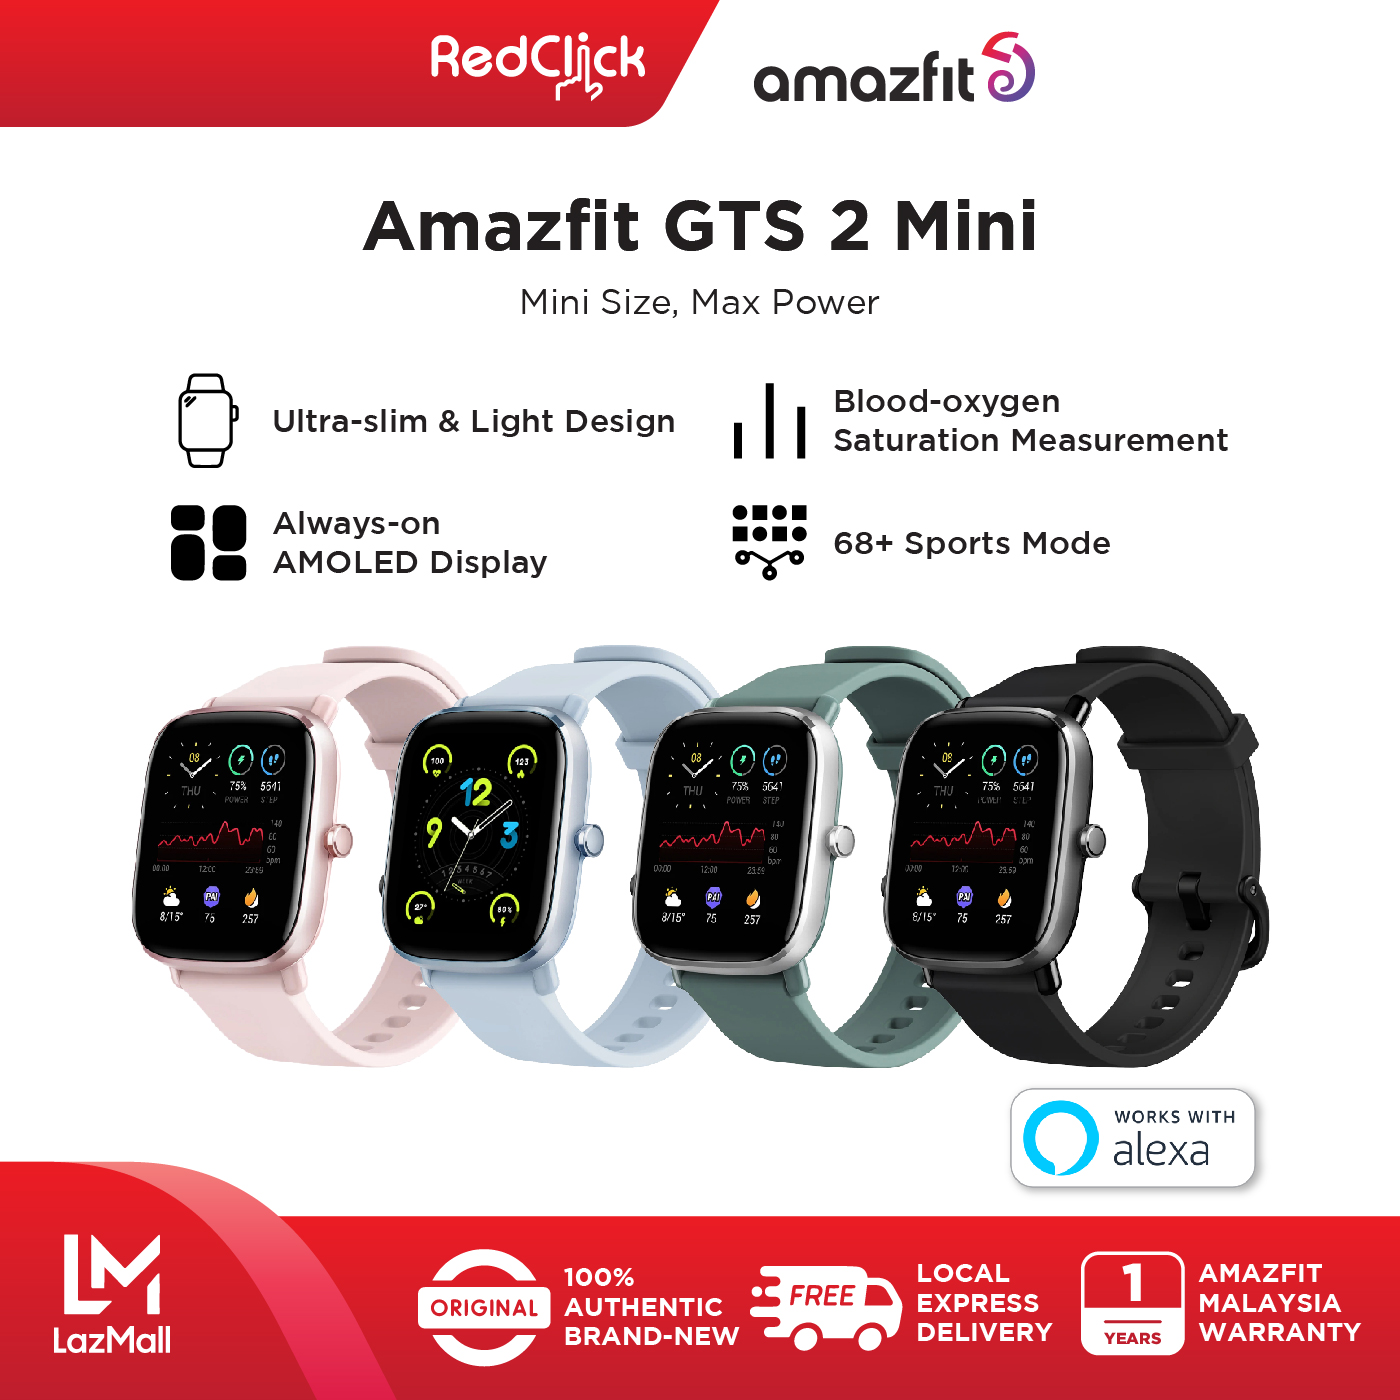 (Official Amazfit) Amazfit GTS 2 Mini A2018 1.55&quot; AMOLED Always On Display Heart Rate Monitoring Sp02 Measurement up to 14 days Battery Life  Cycle Tracking Smart watch + Free Gift